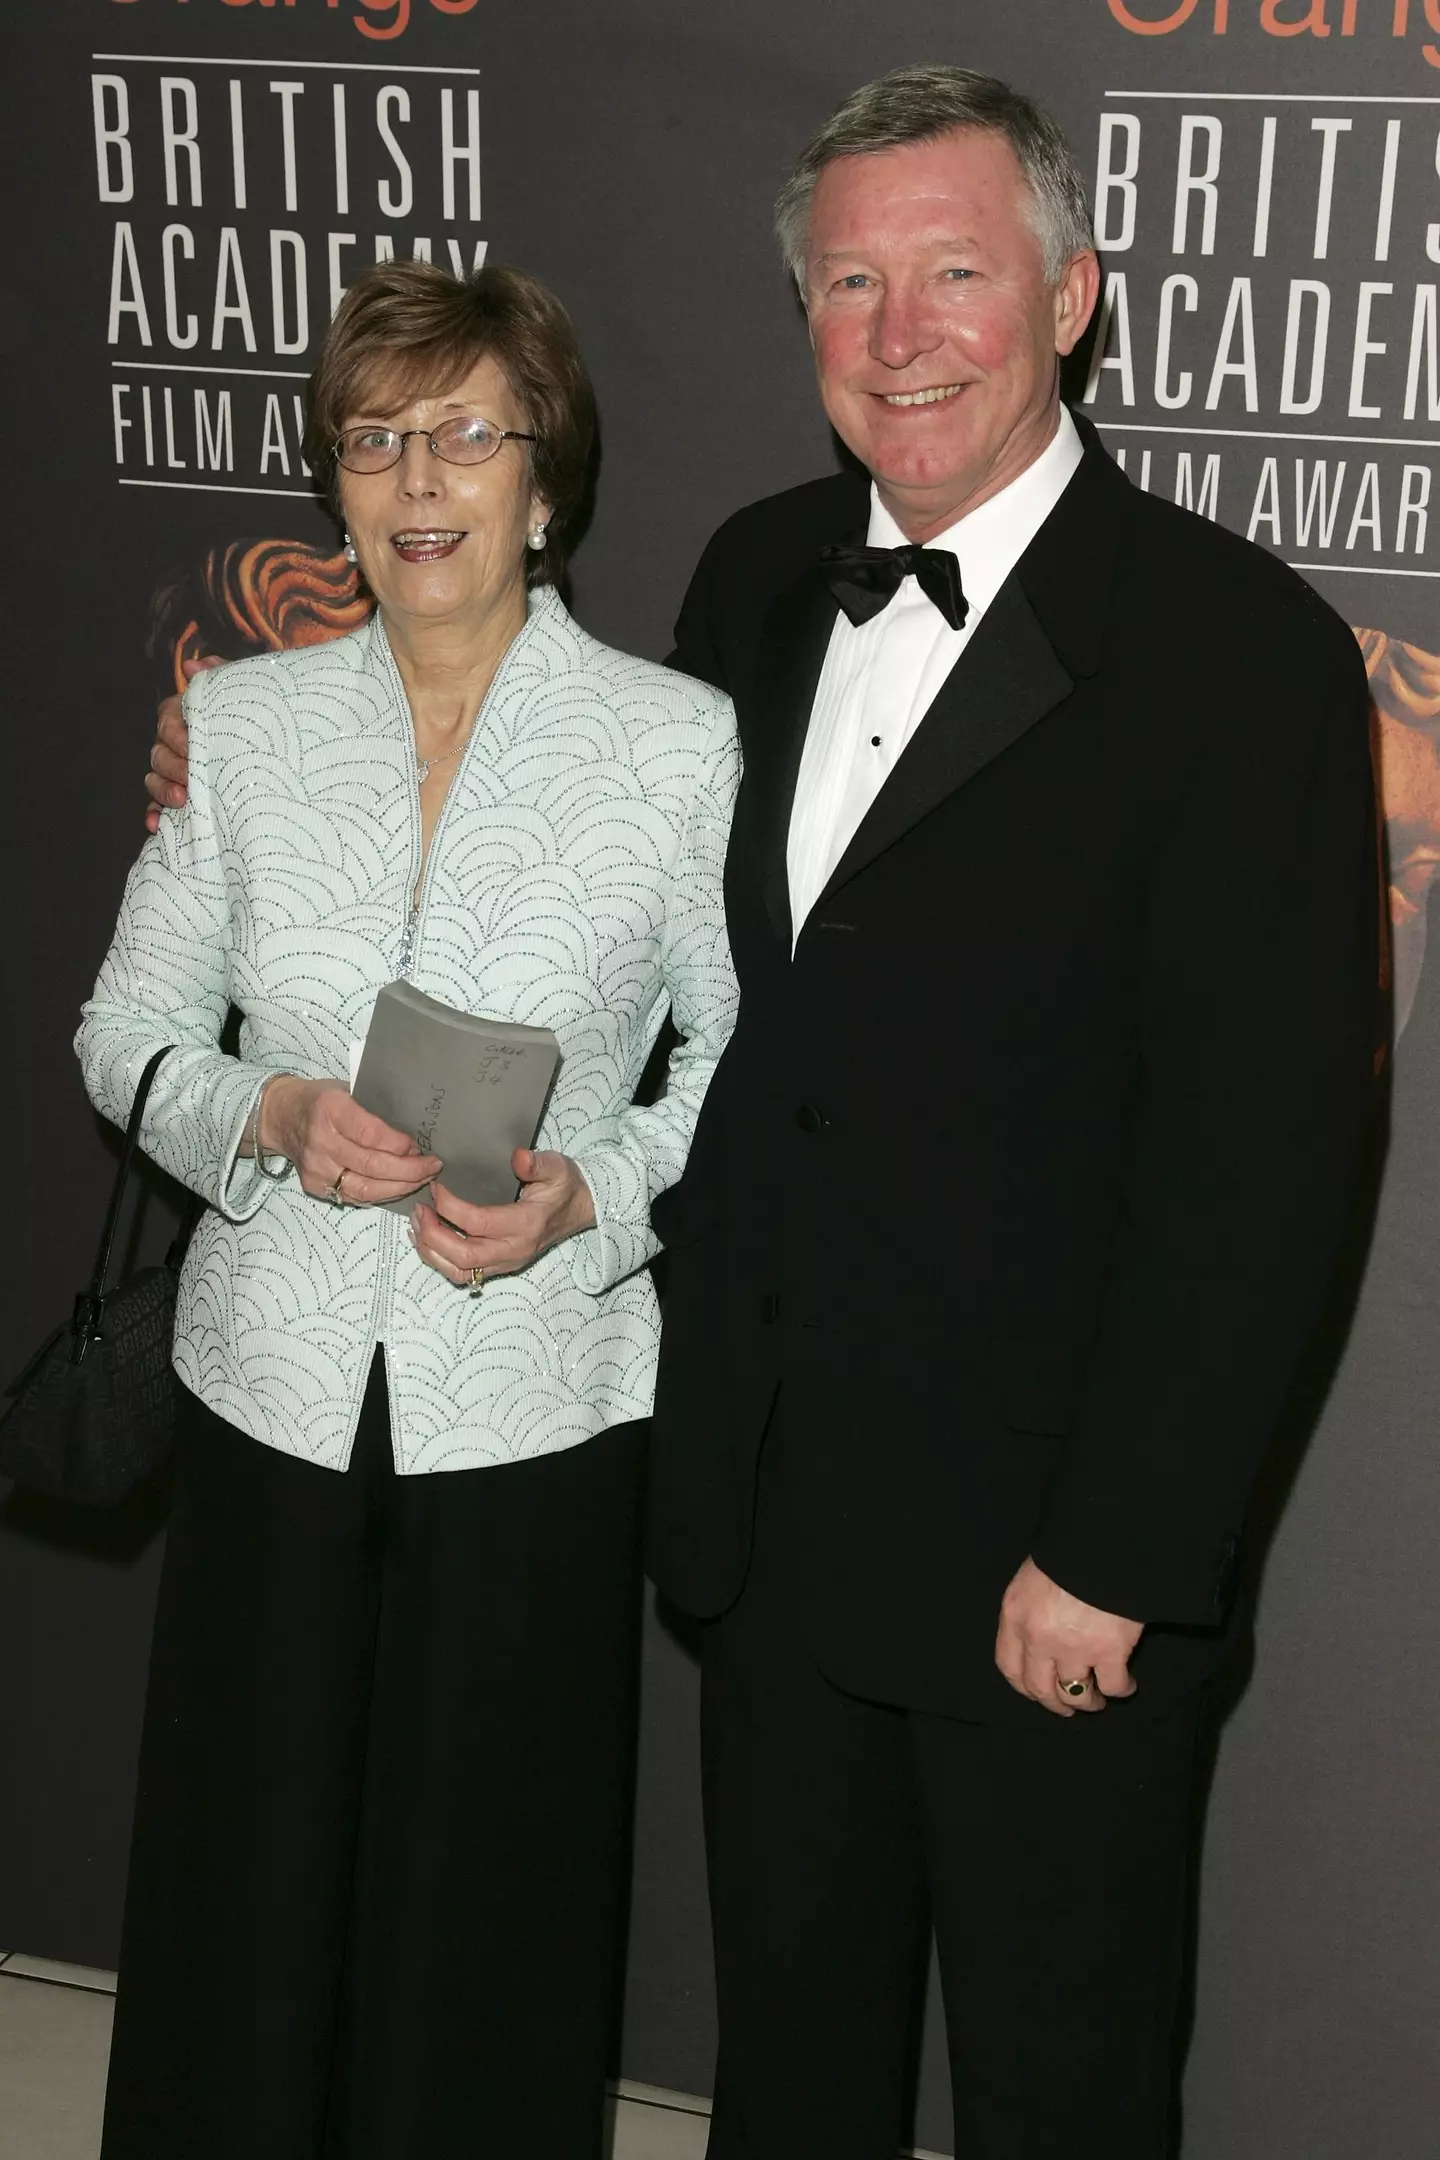 Sir Alex praised Cathy for the love and support she had shown over the years.